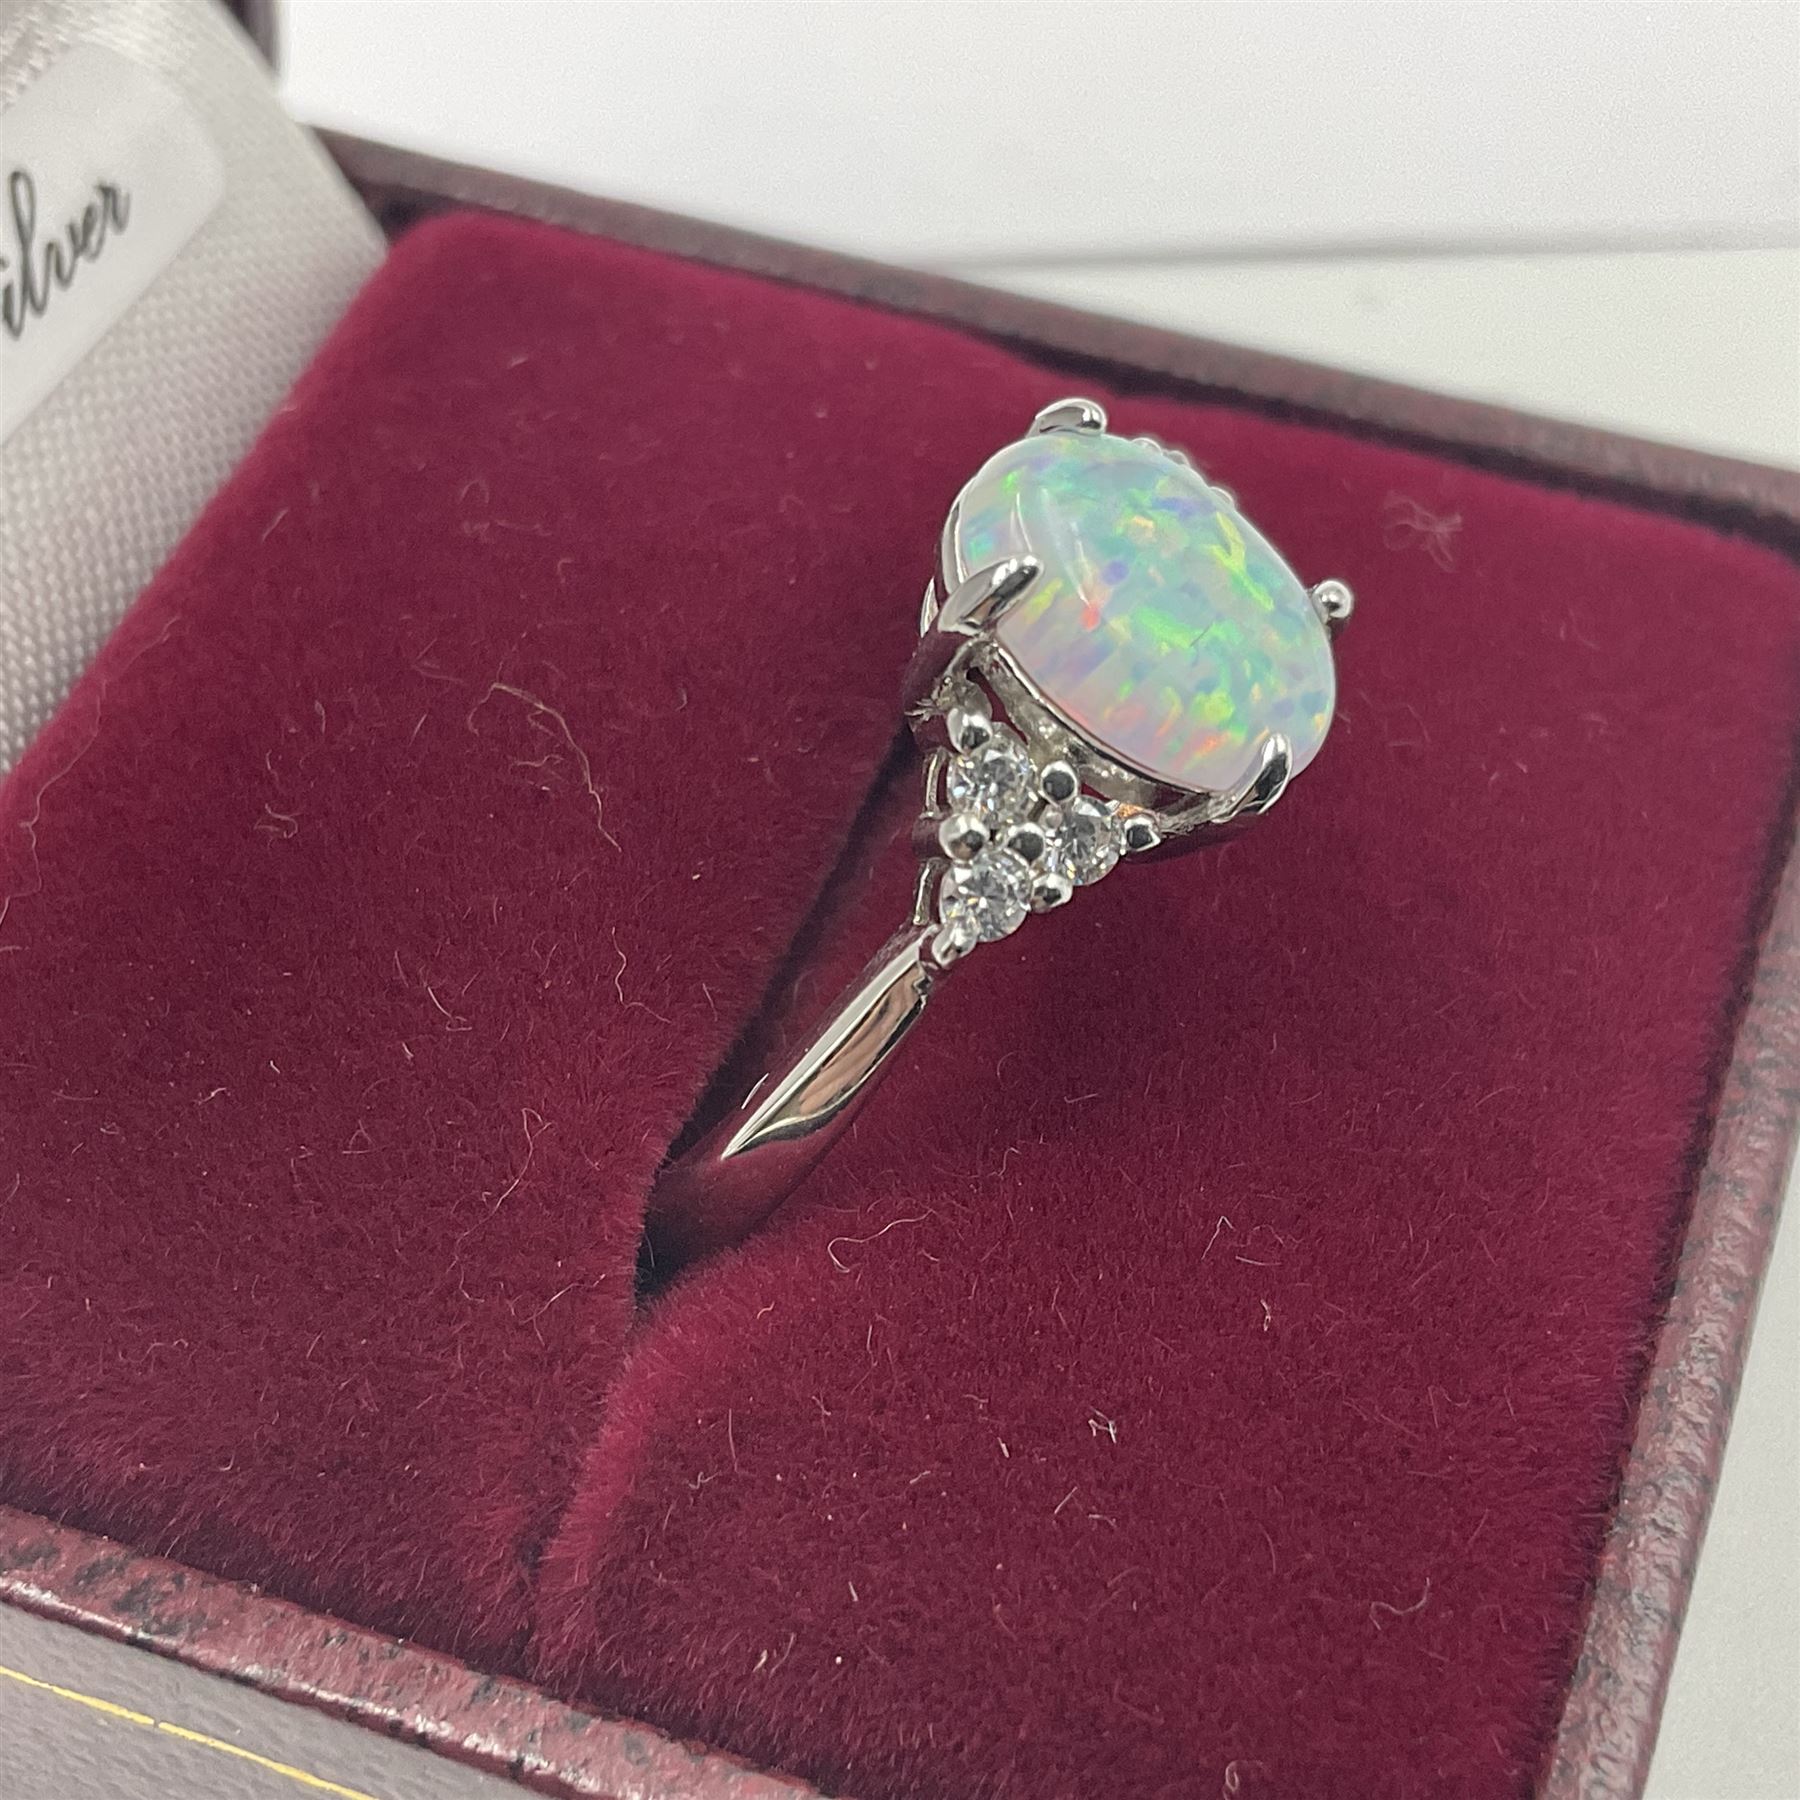 Silver cubic zirconia and opal cluster ring - Image 2 of 4